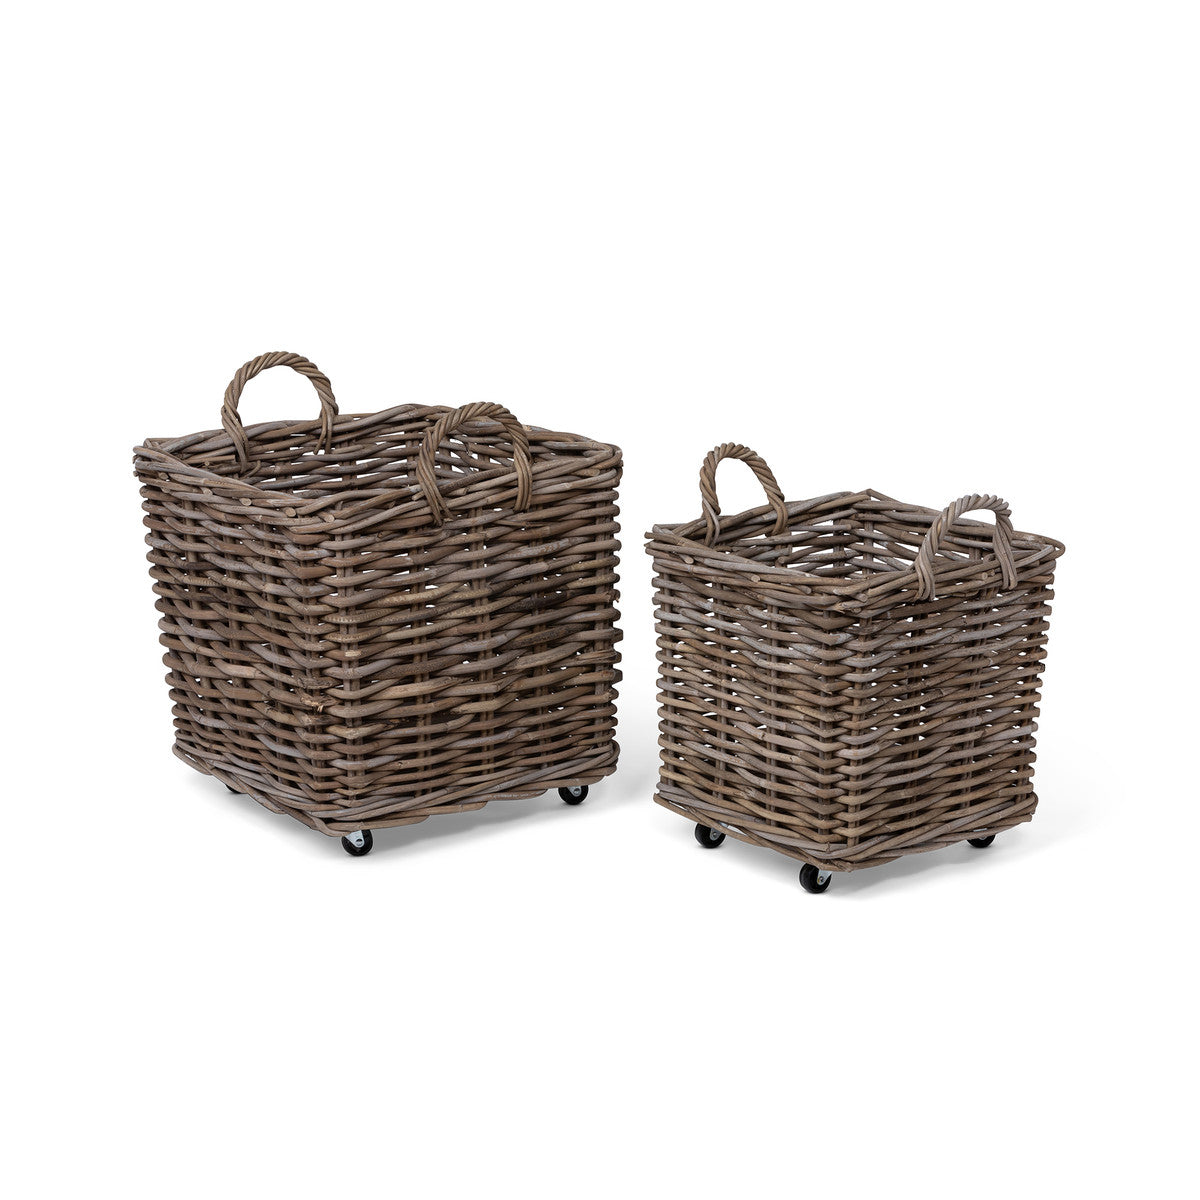 Rattan Square Basket with Casters